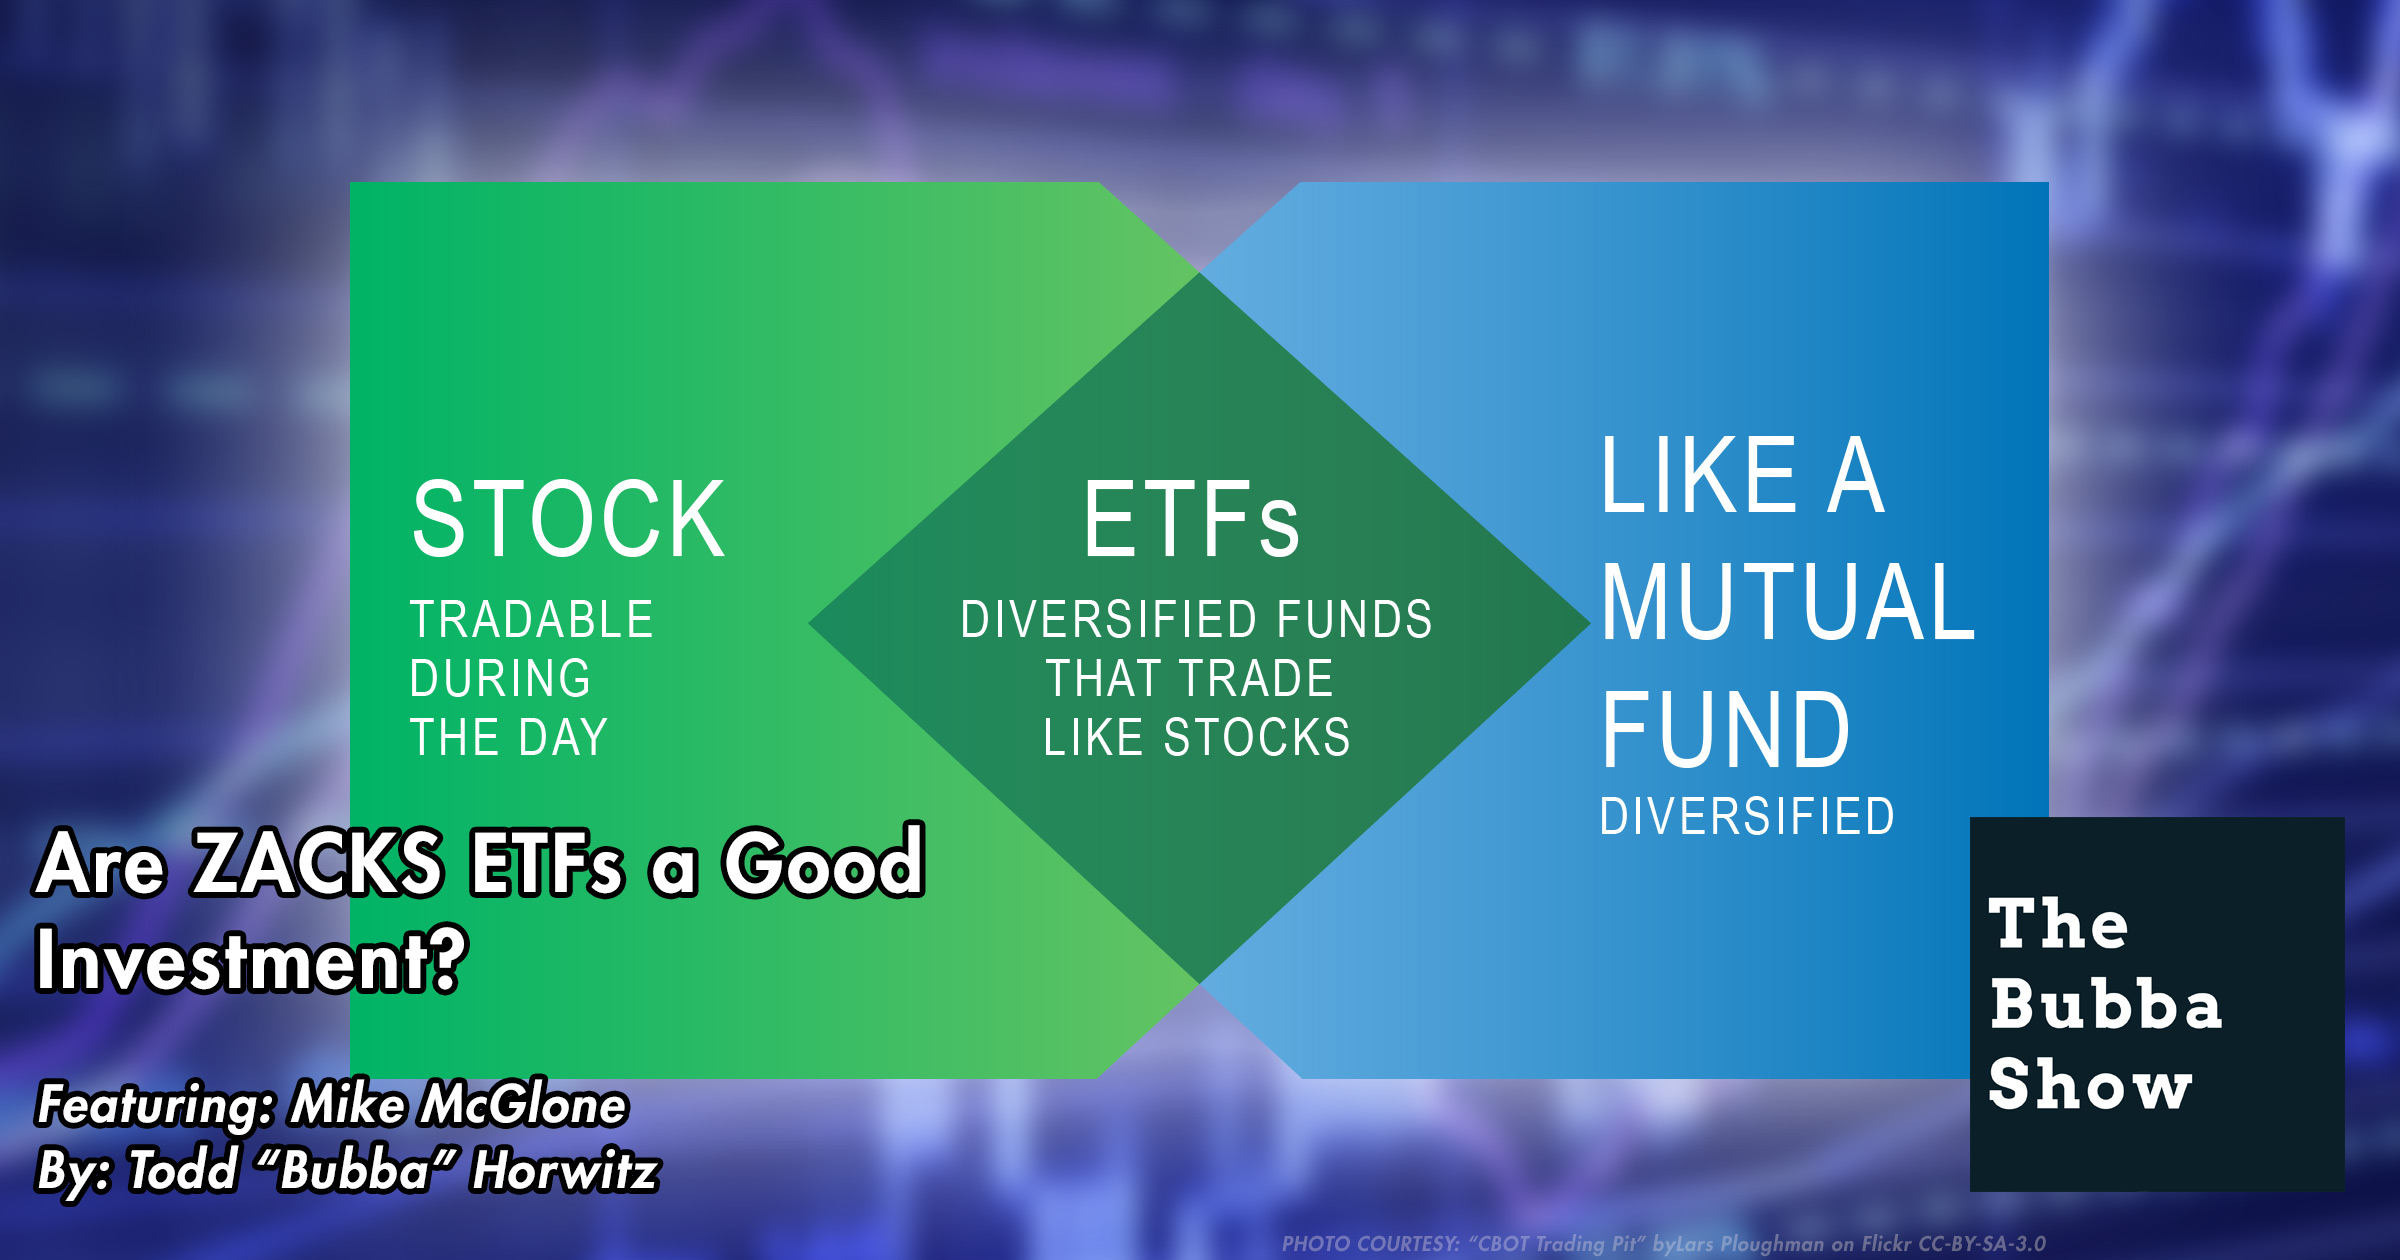 Are ZACKS ETF's a Good Investment?